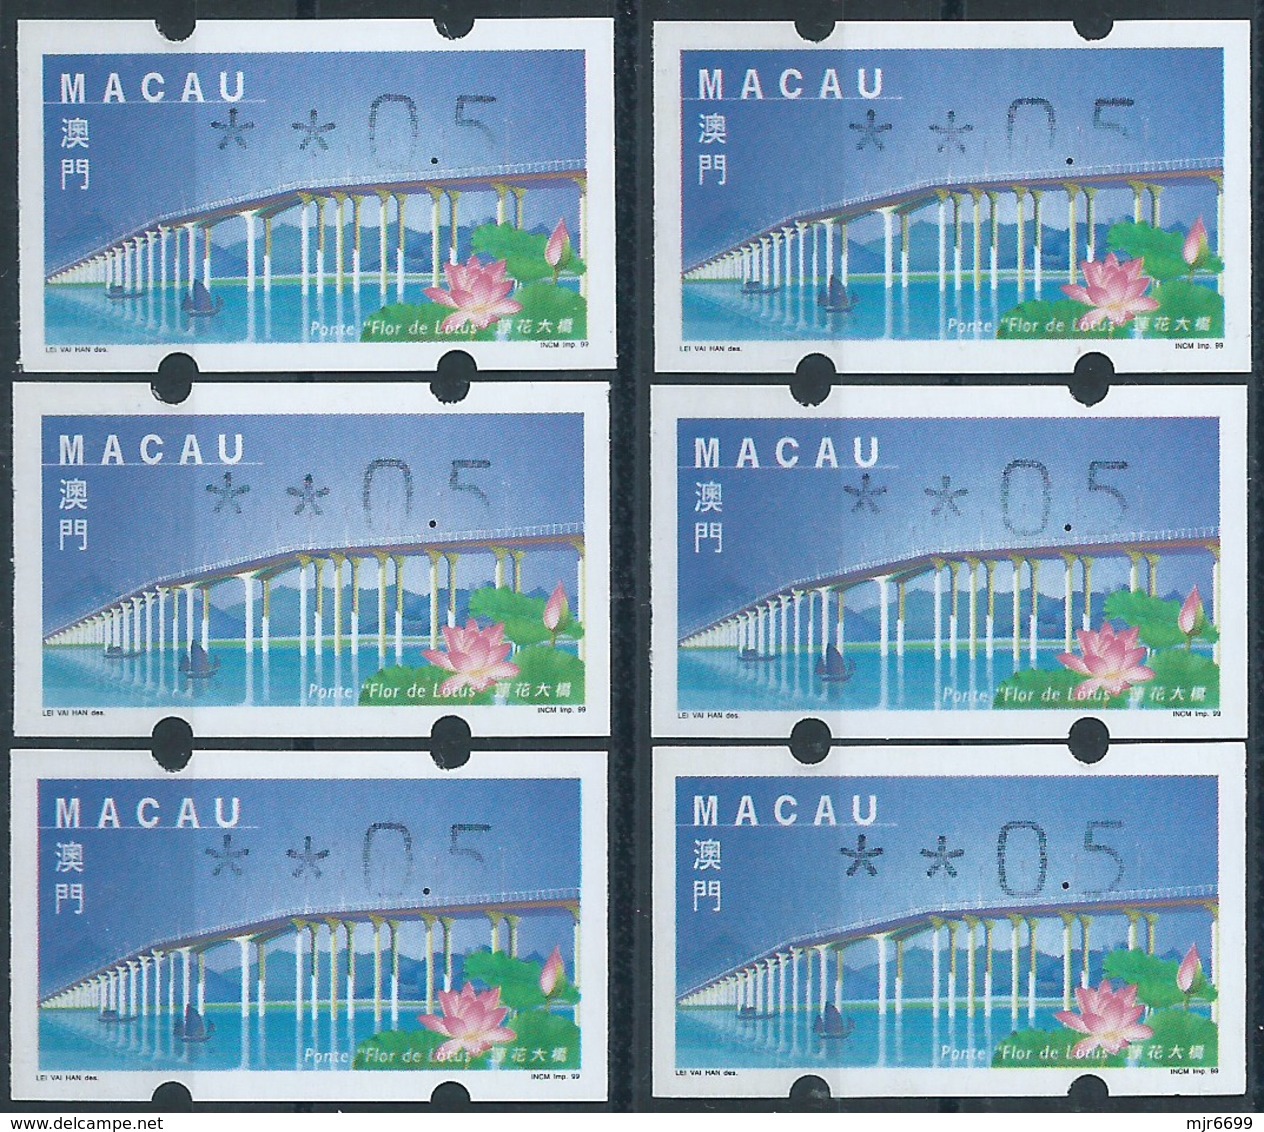 MACAU ATM LABELS, 1999 LOTUS FLOWER BRIDGE ISSUE, 50 AVOS WITH VALUE HALF PRINTED LOT OF 5 + 1 NORMAL FOR COMPARE - Automatenmarken